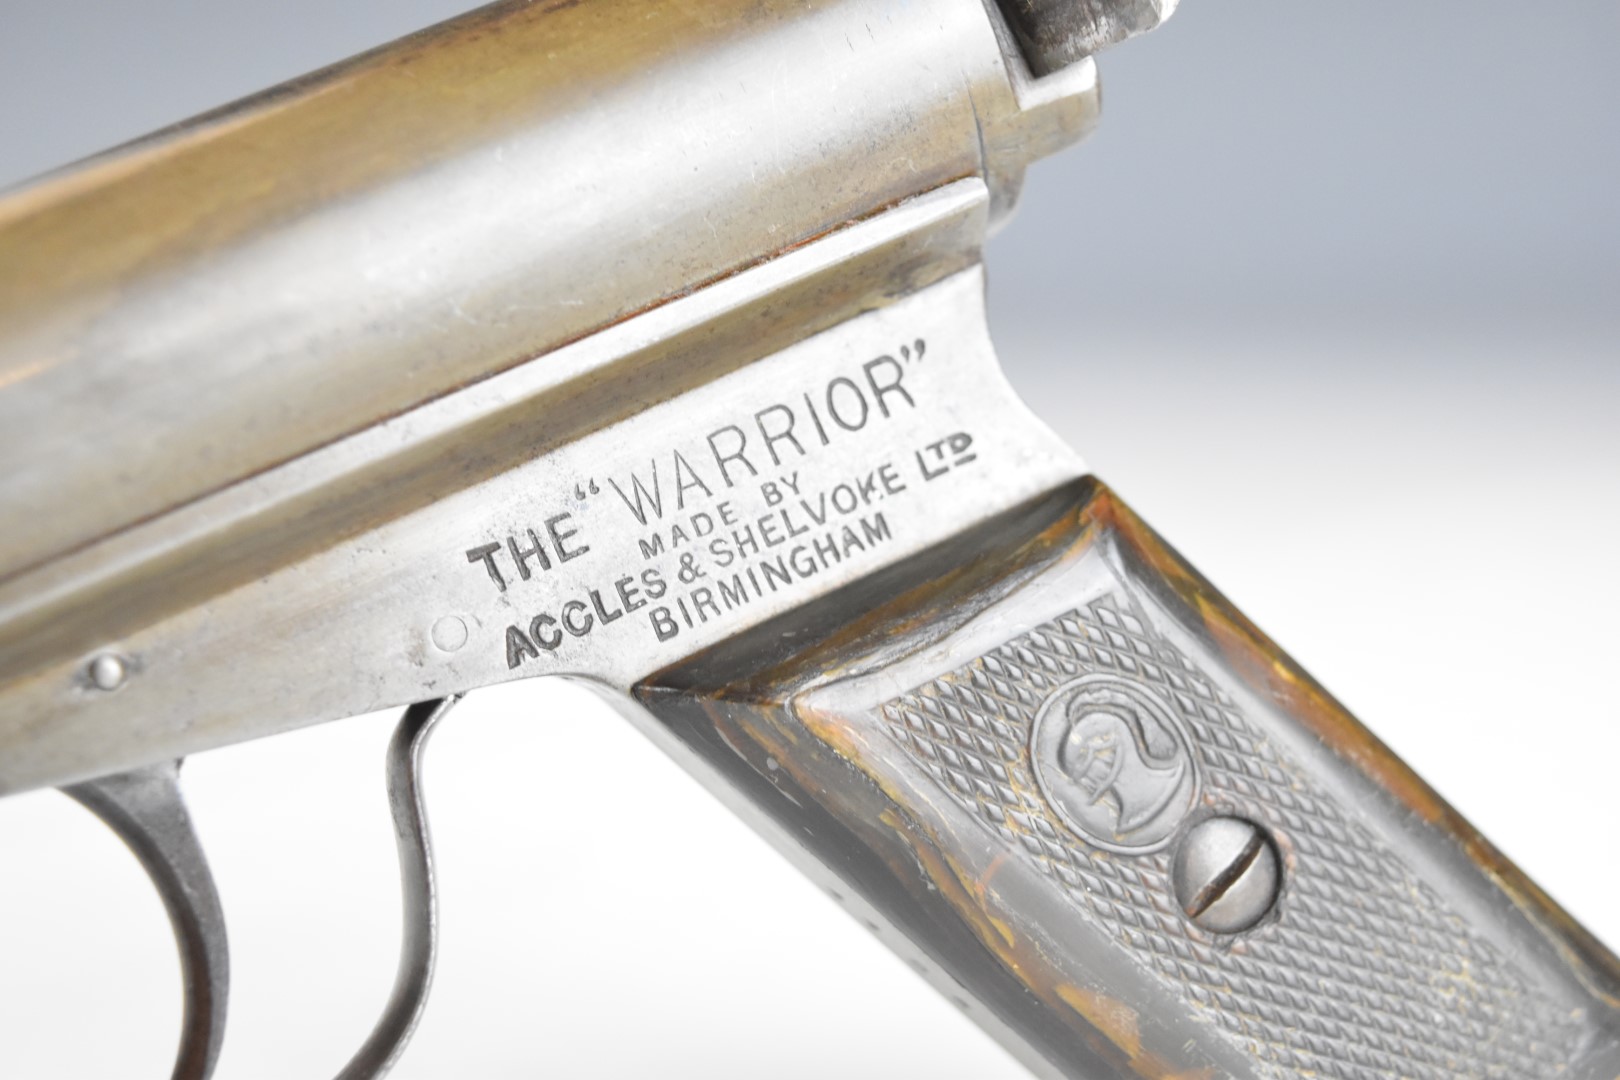 Accles & Shelvoke Ltd F Clarke patent The Warrior .177 side lever air pistol with logo and - Image 7 of 12